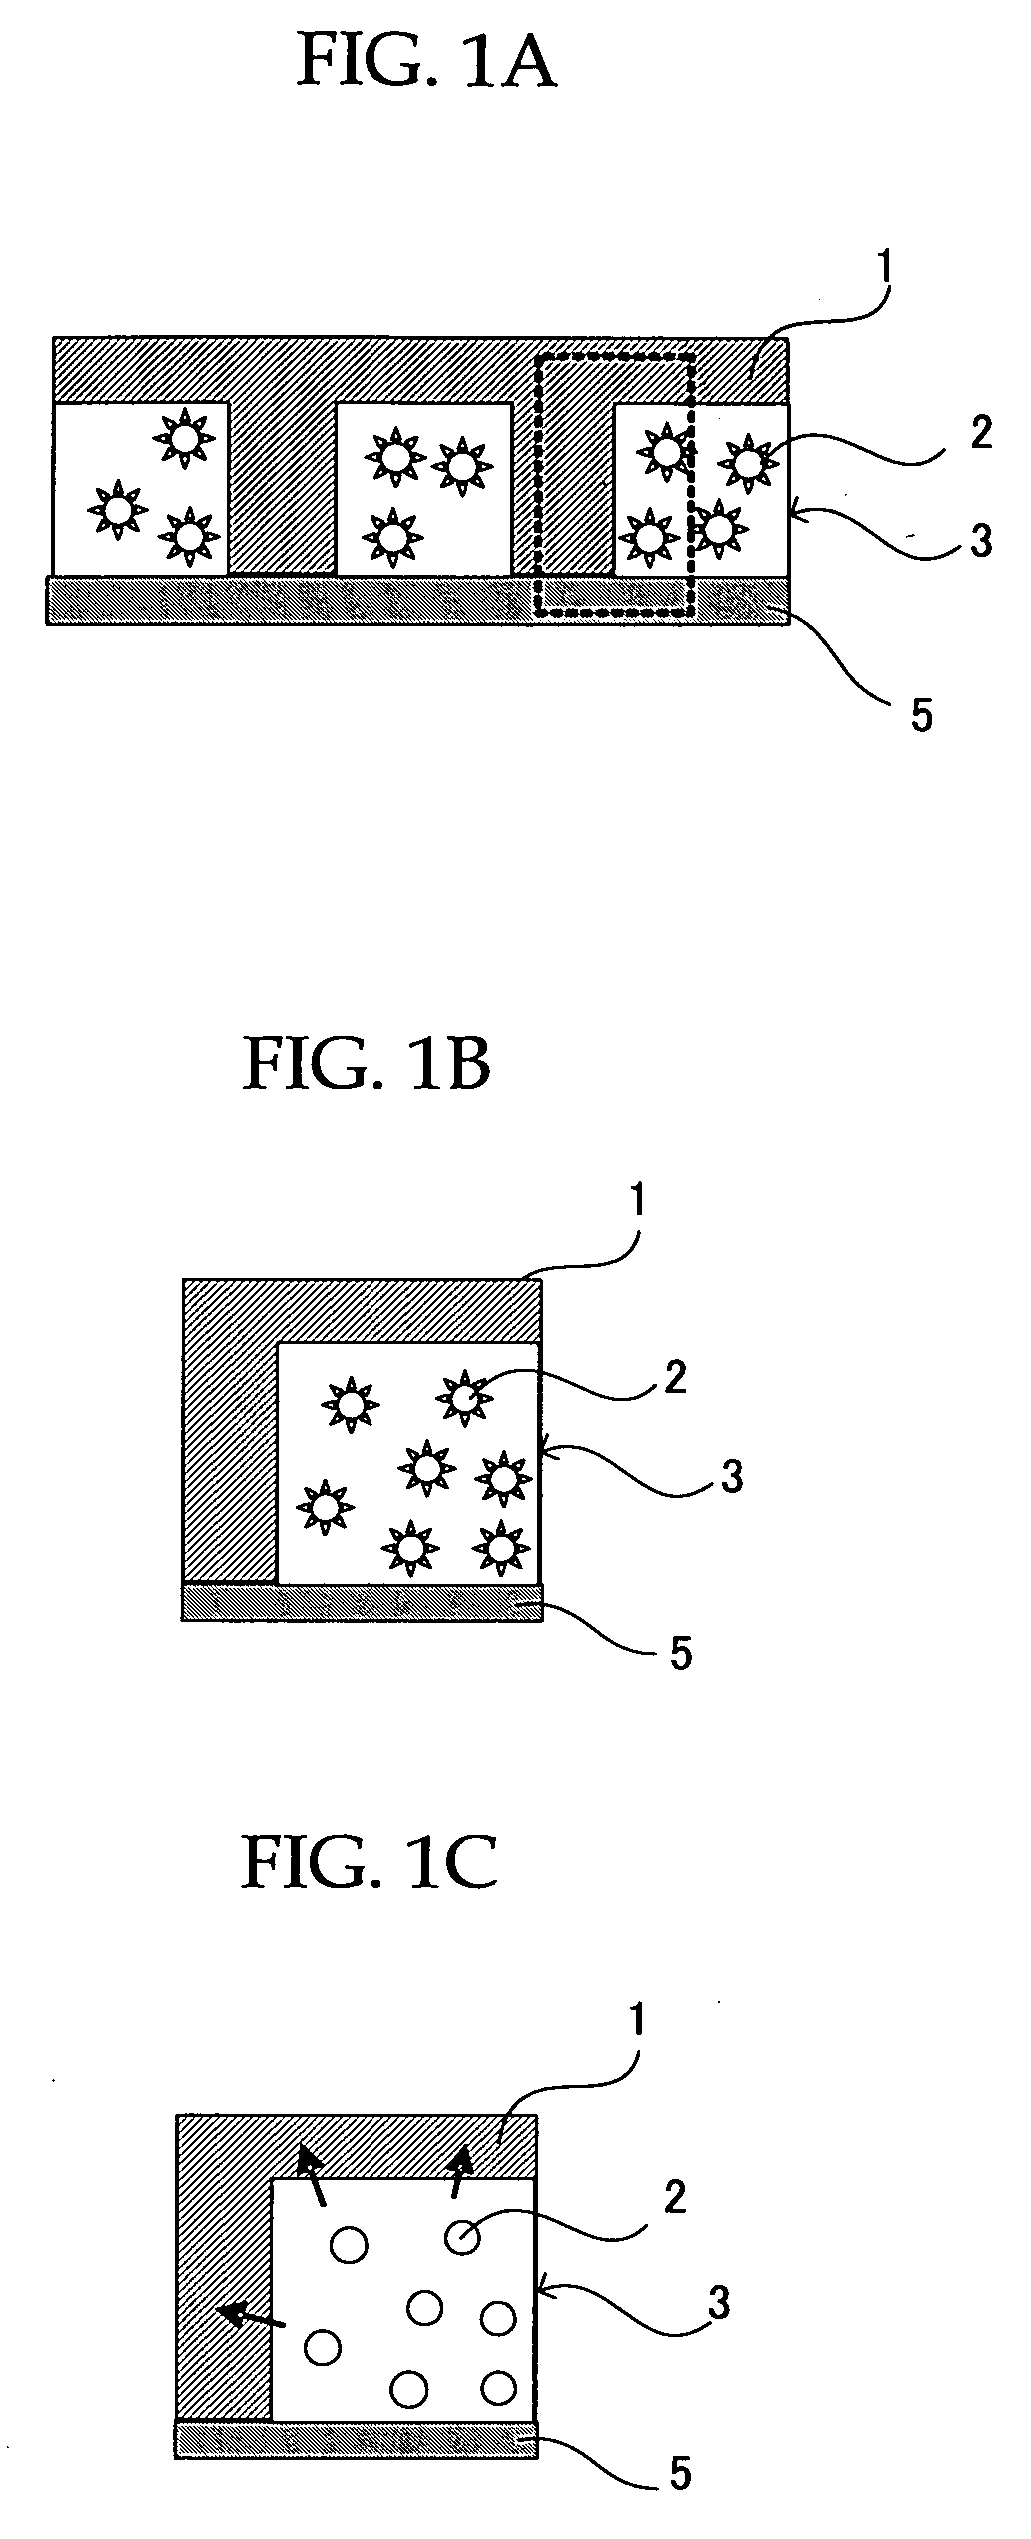 Resist composition, method for forming resist pattern, and semiconductor device and method for manufacturing the same